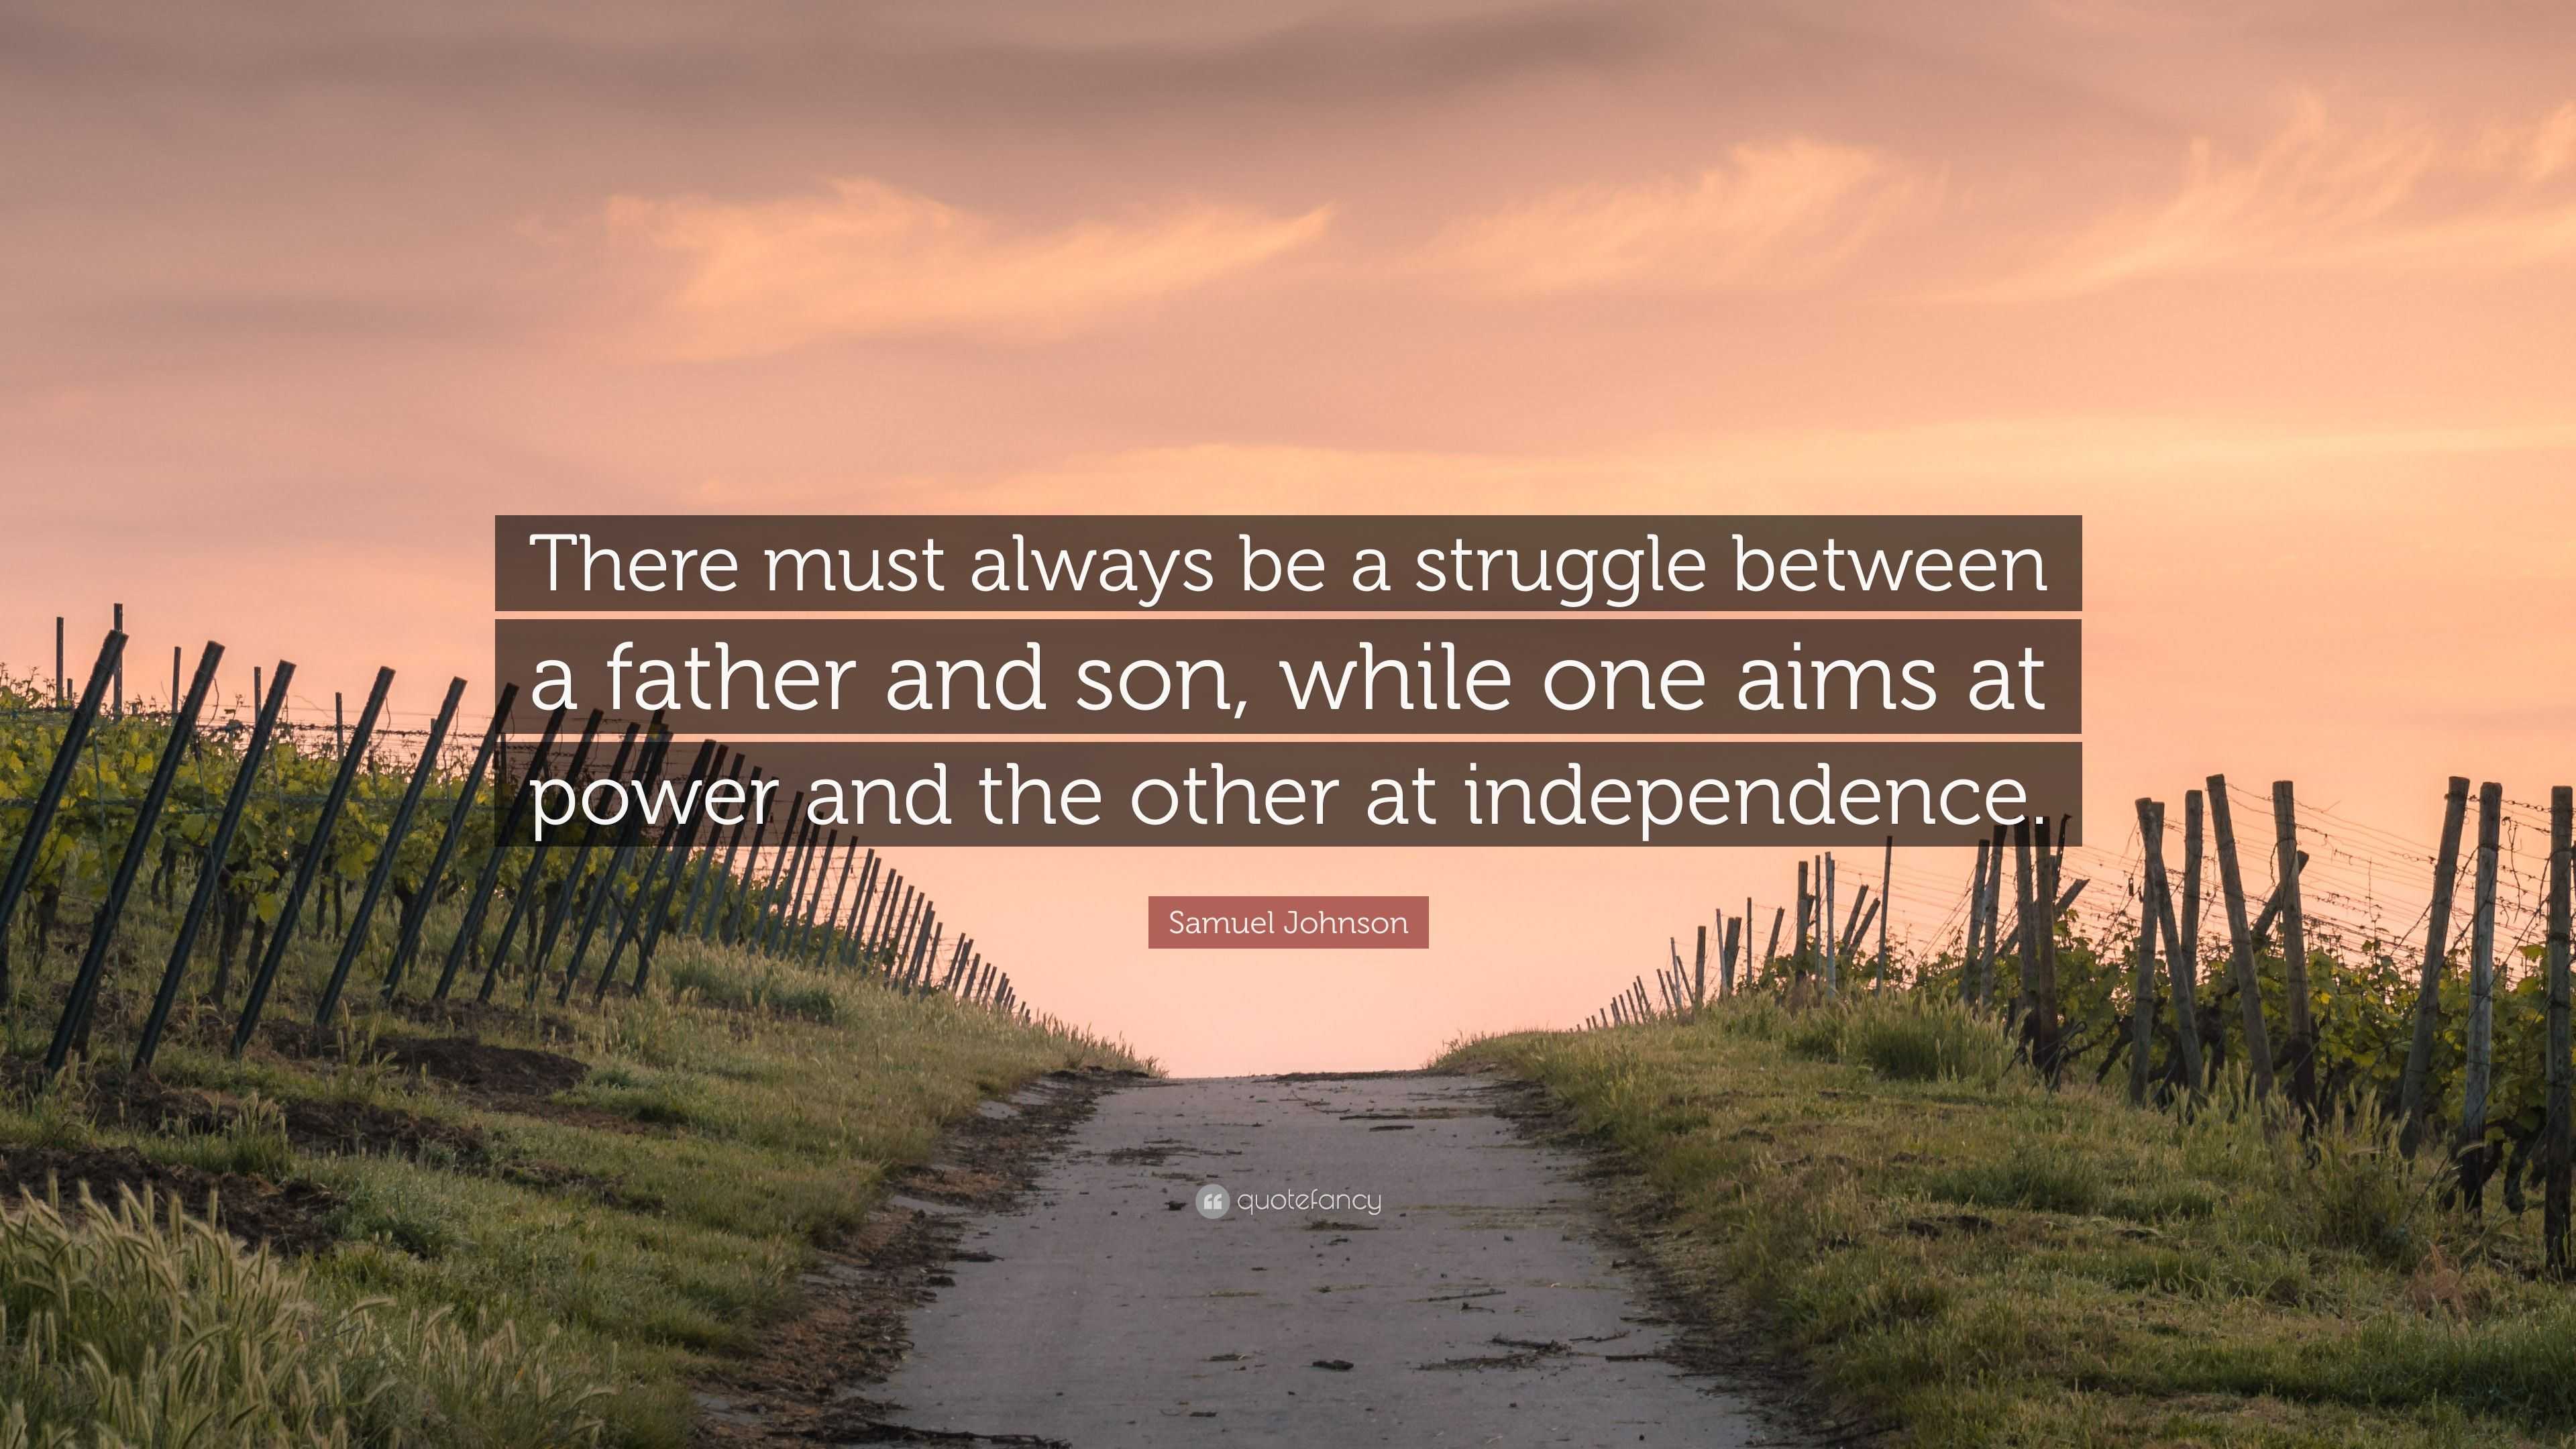 Samuel Johnson Quote: “There must always be a struggle between a father